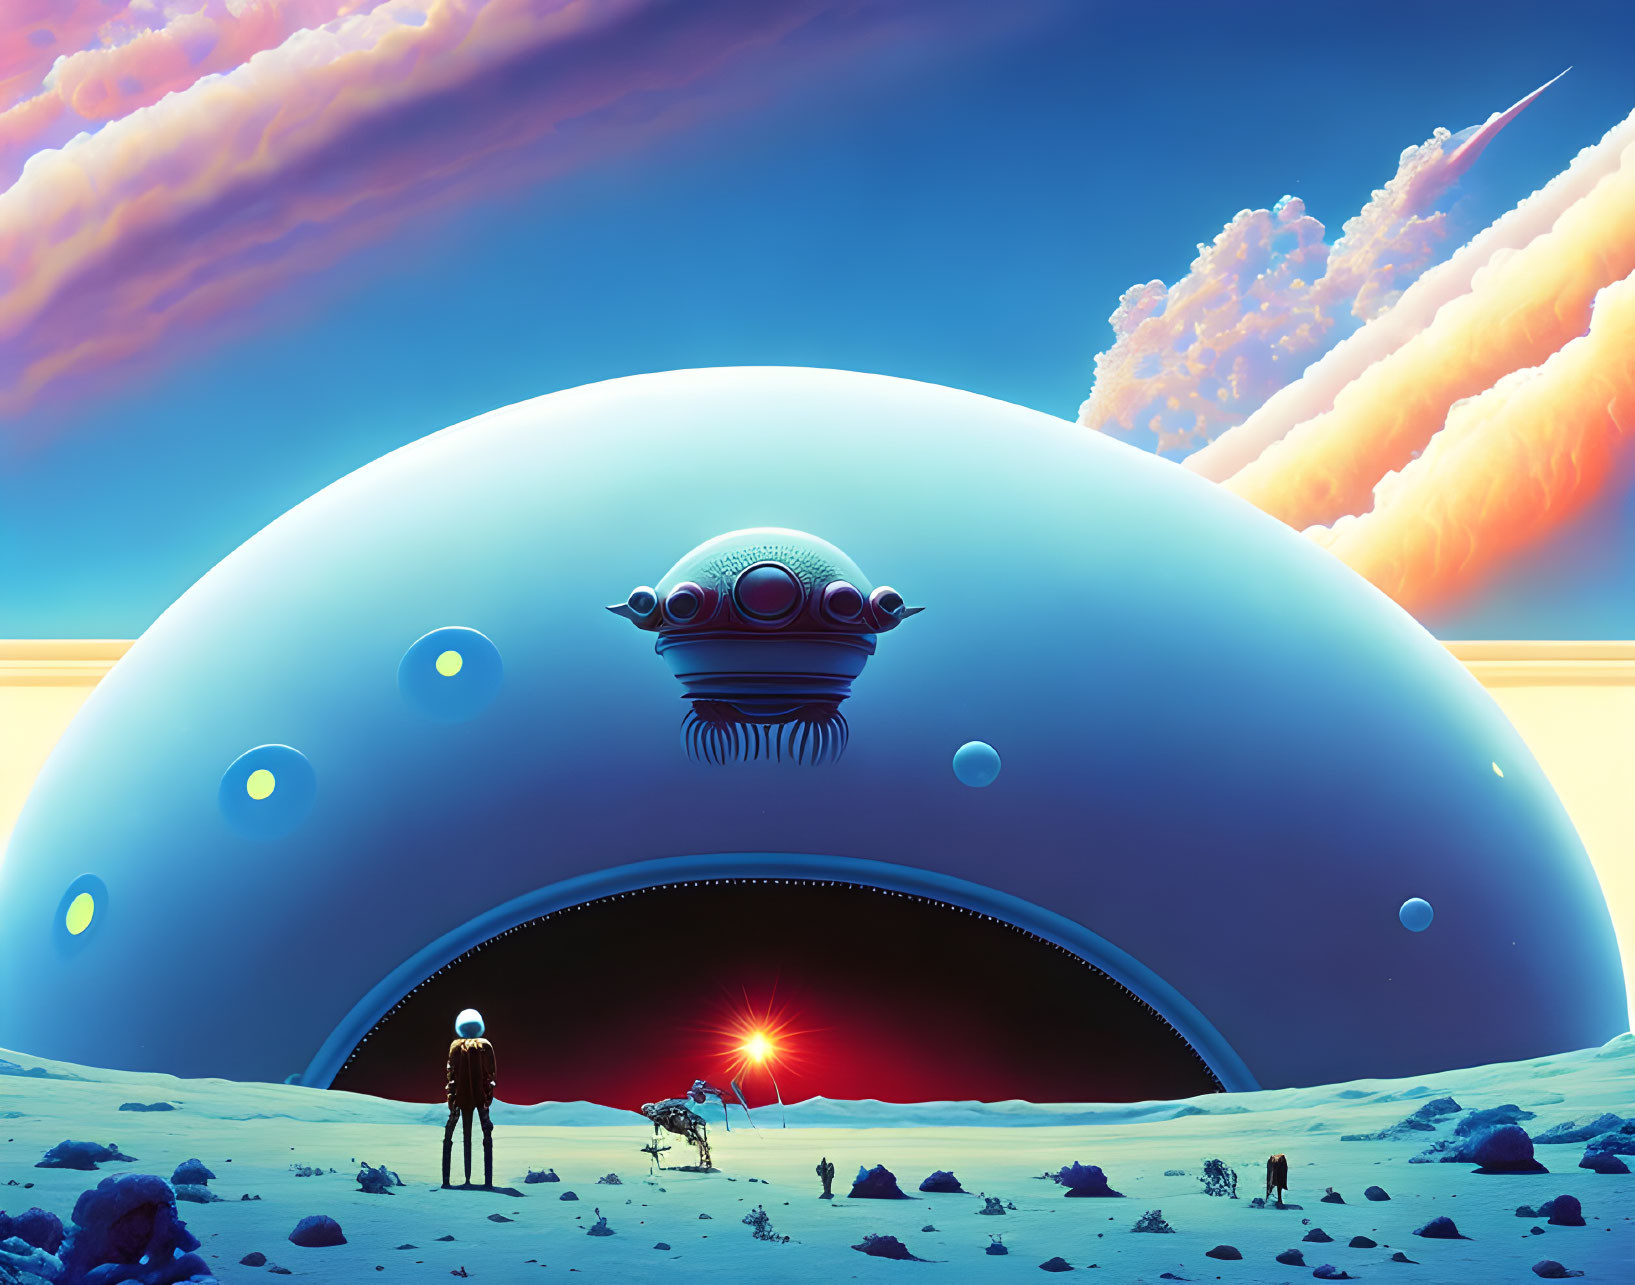 Person and dog on alien planet with giant spherical structure and comet-filled sky.